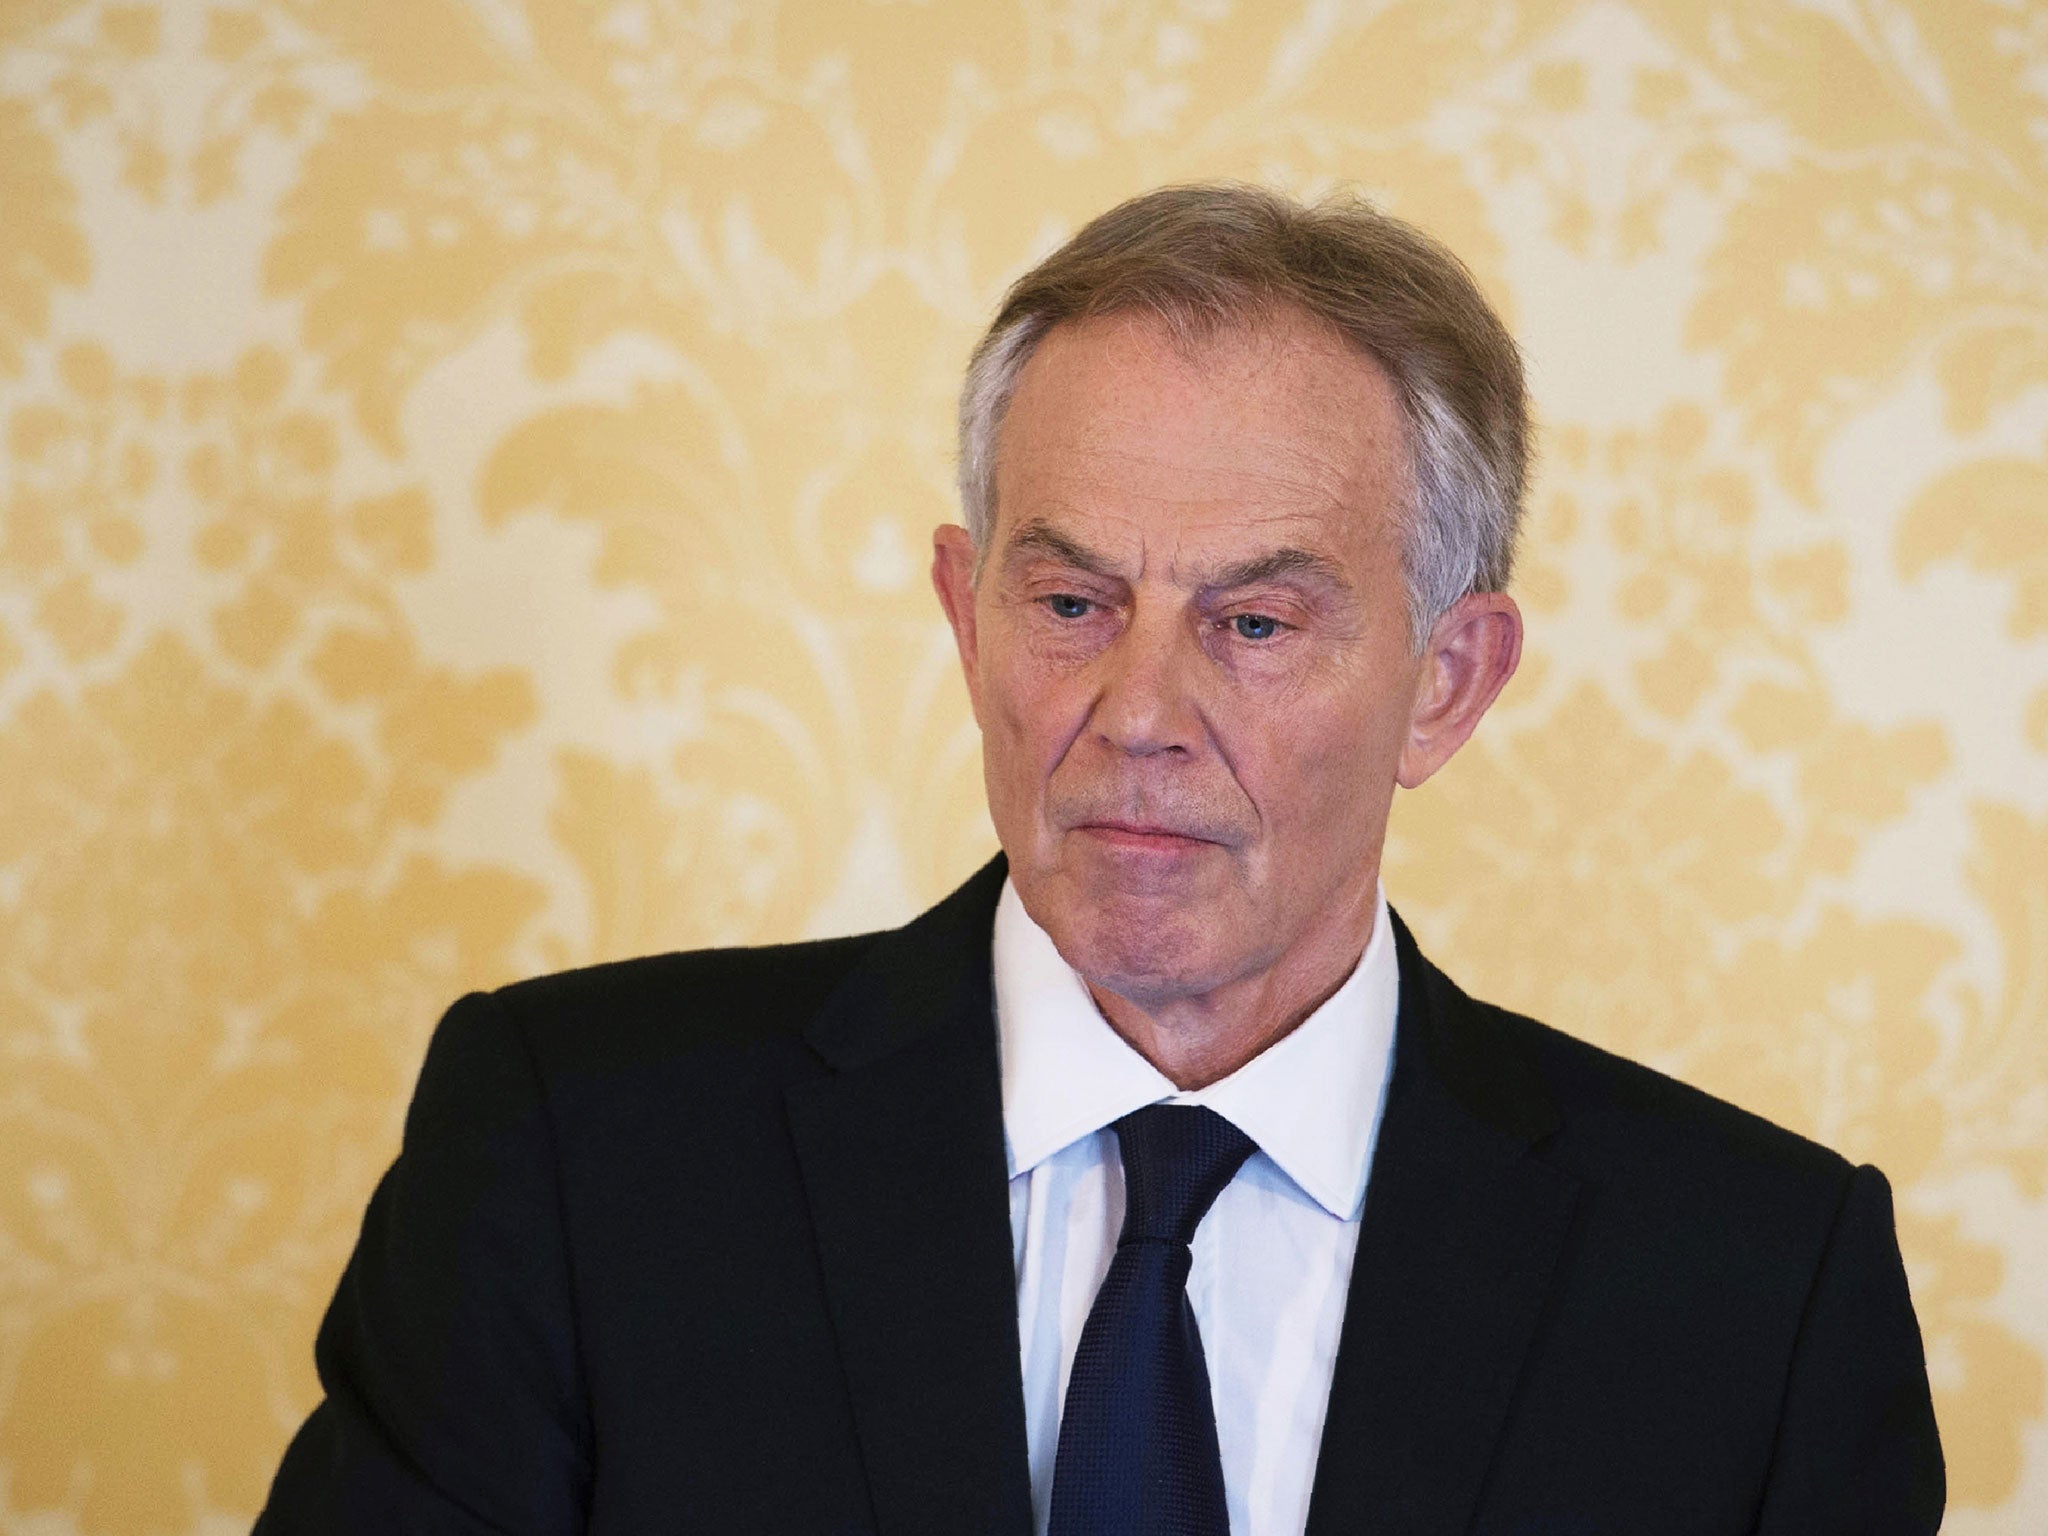 Tony Blair, pictured addressing troops in Basra in 2003, faces a parliamentary motion over his ‘deceit’ in the run-up to the Iraq War